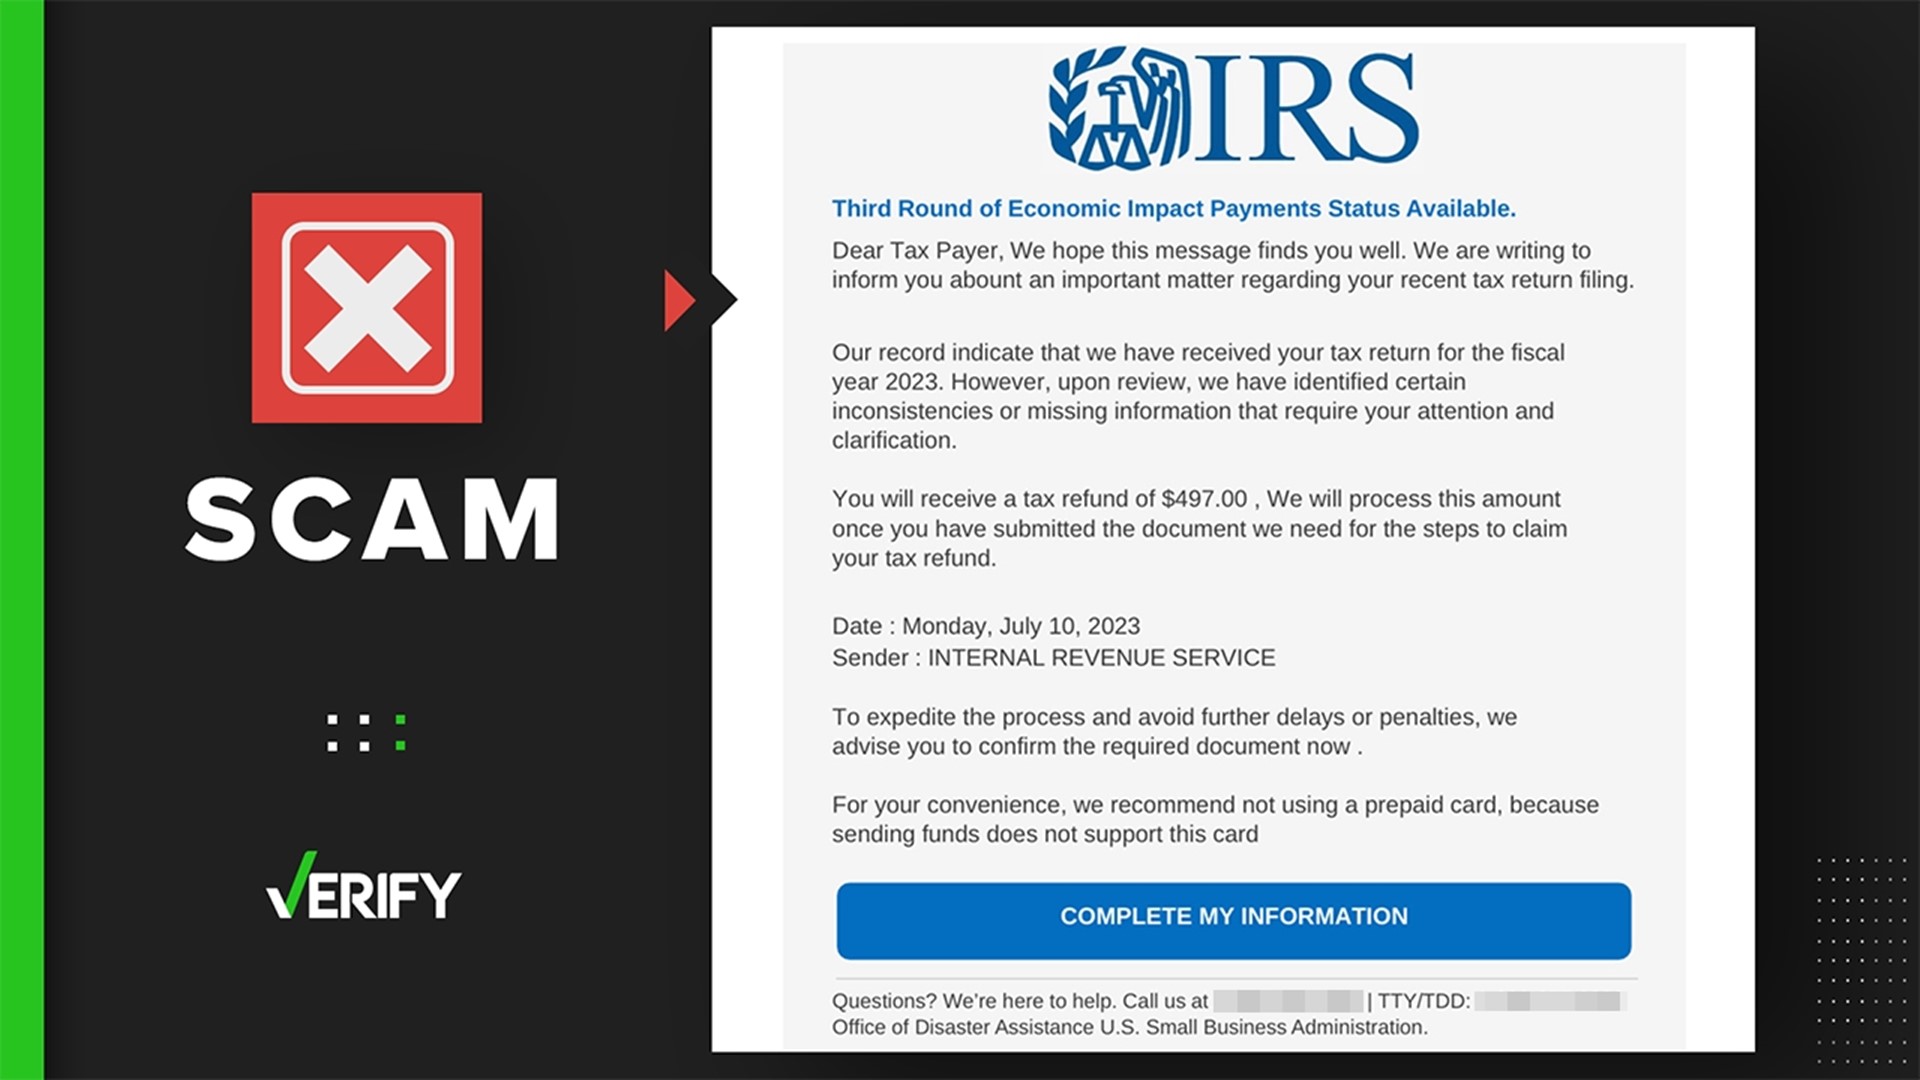 The IRS is not sending emails to taxpayers about a third round of economic impact payments because it does not initiate contact via email. This is a phishing scam.